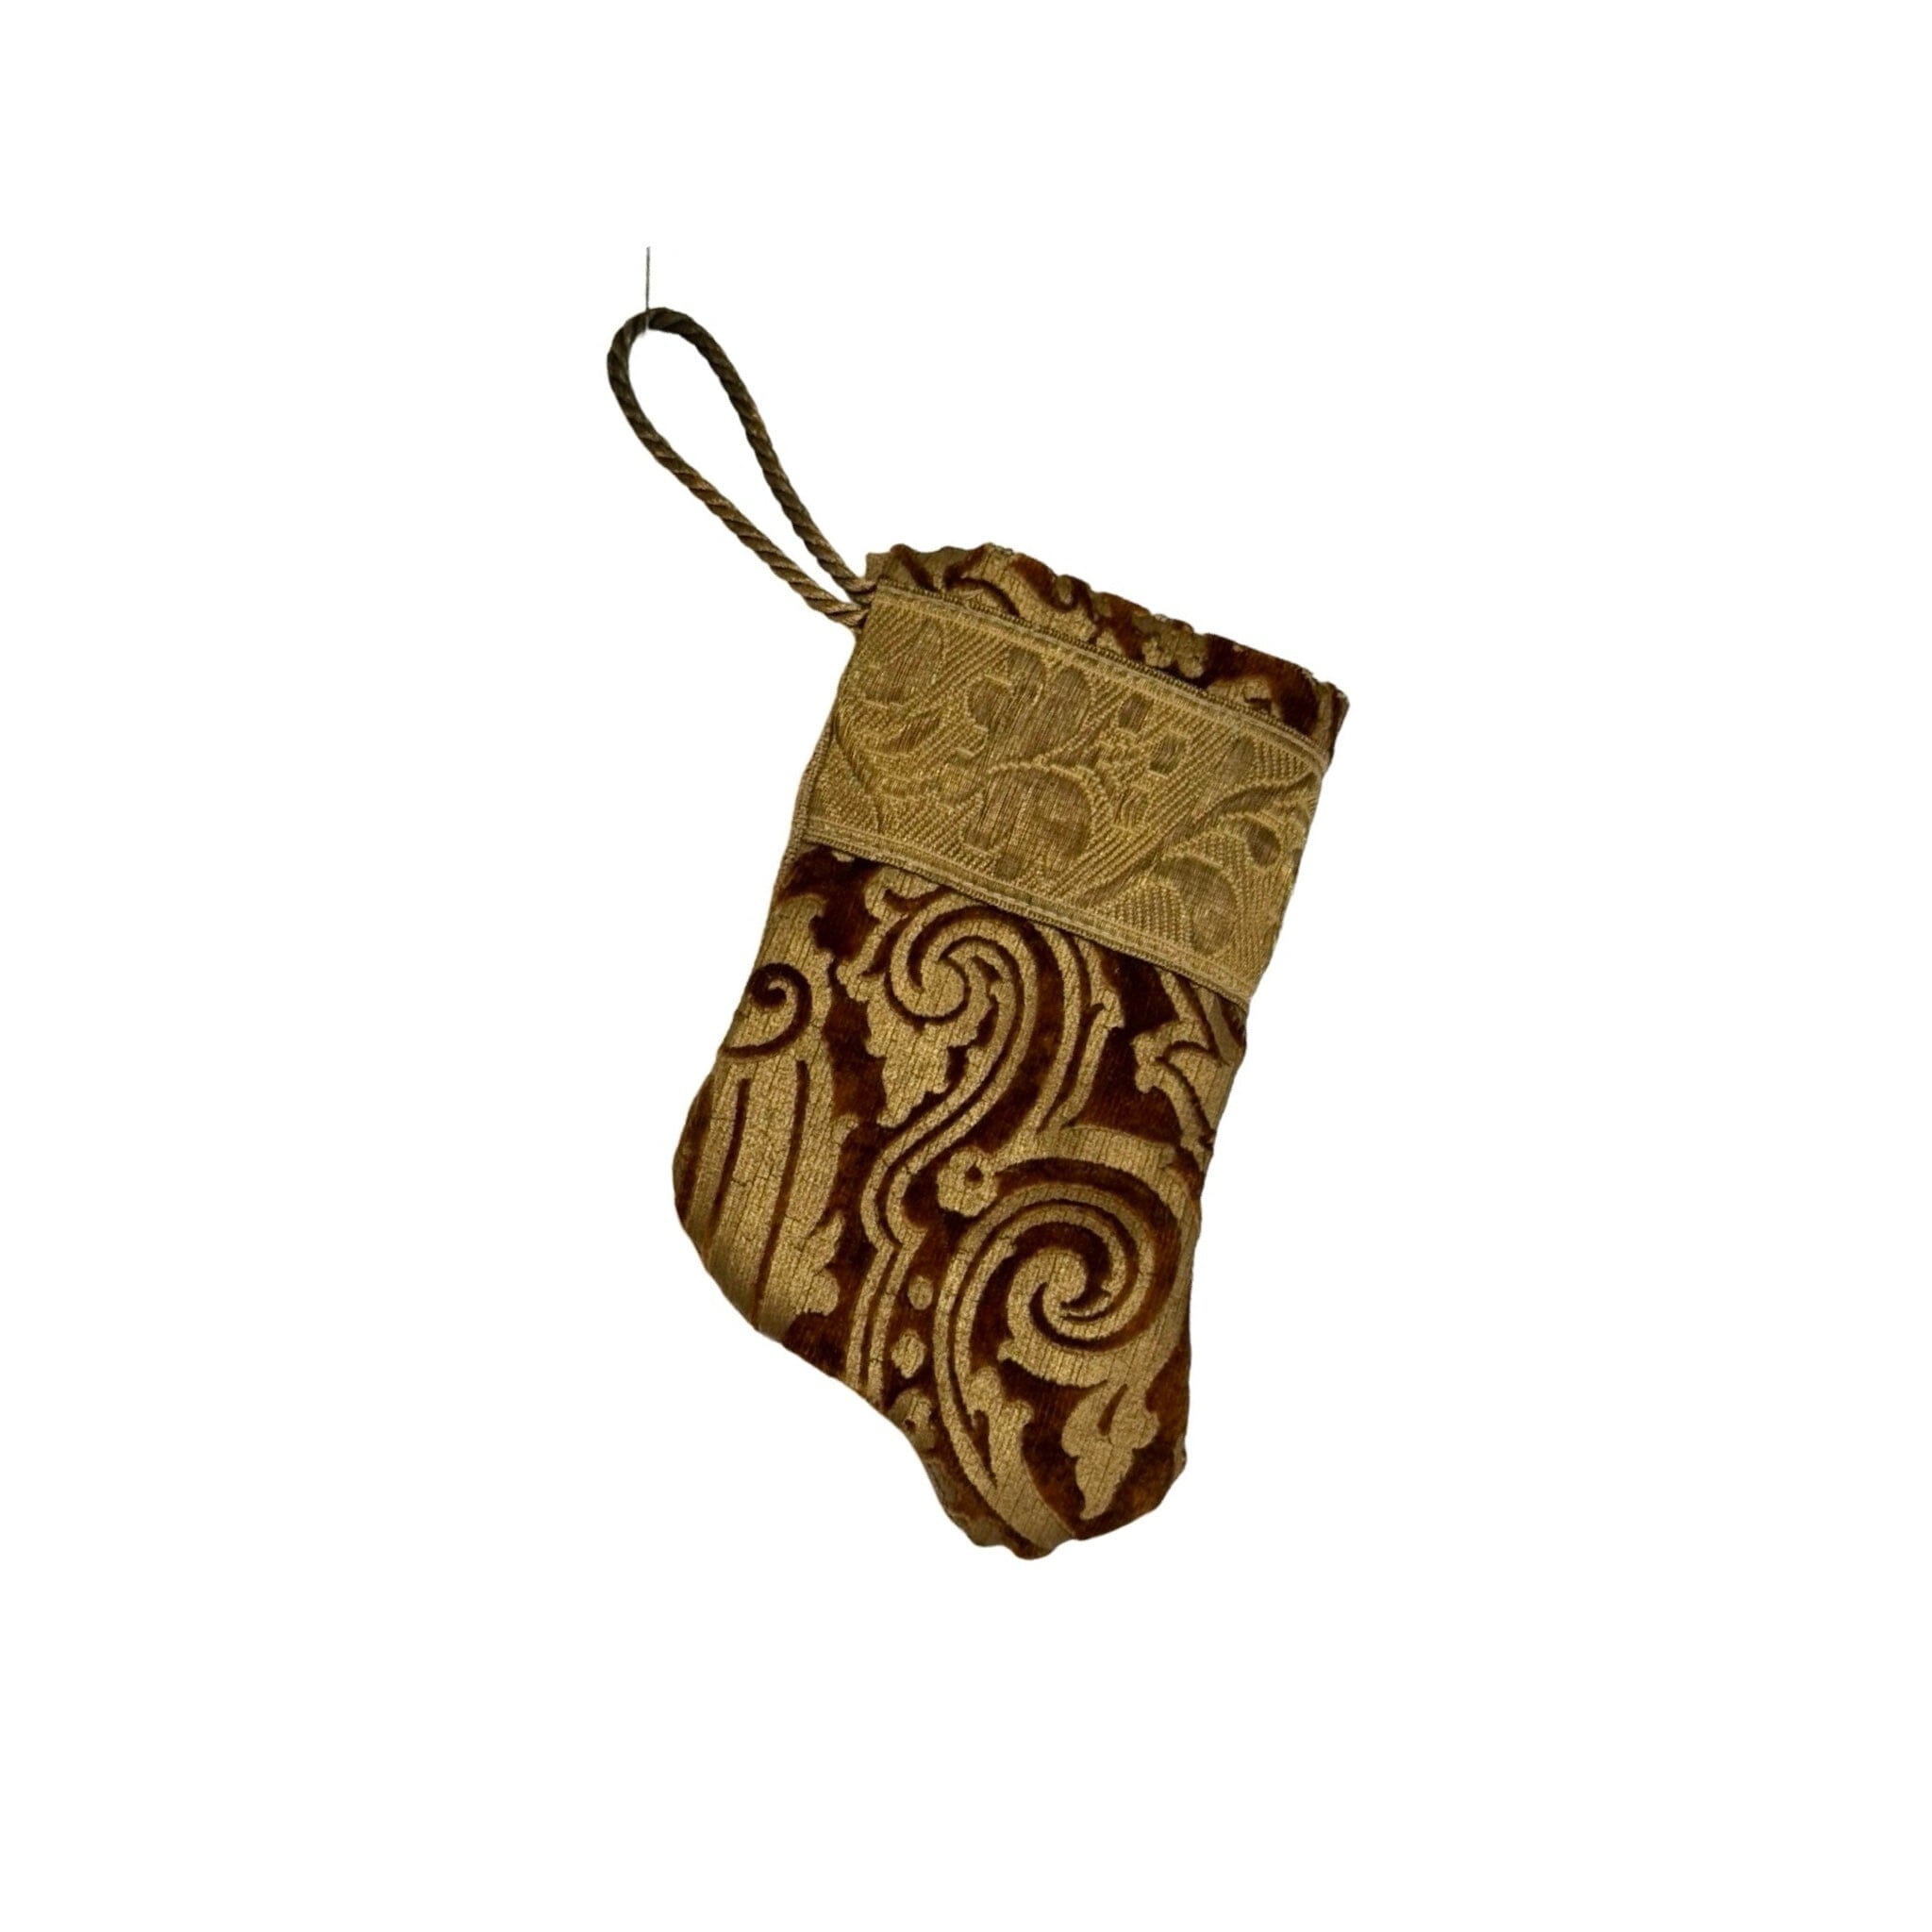 Handmade Mini Stocking Made From Vintage Fabric and Trims- Brown and Gold Ornament B. Viz Design C 